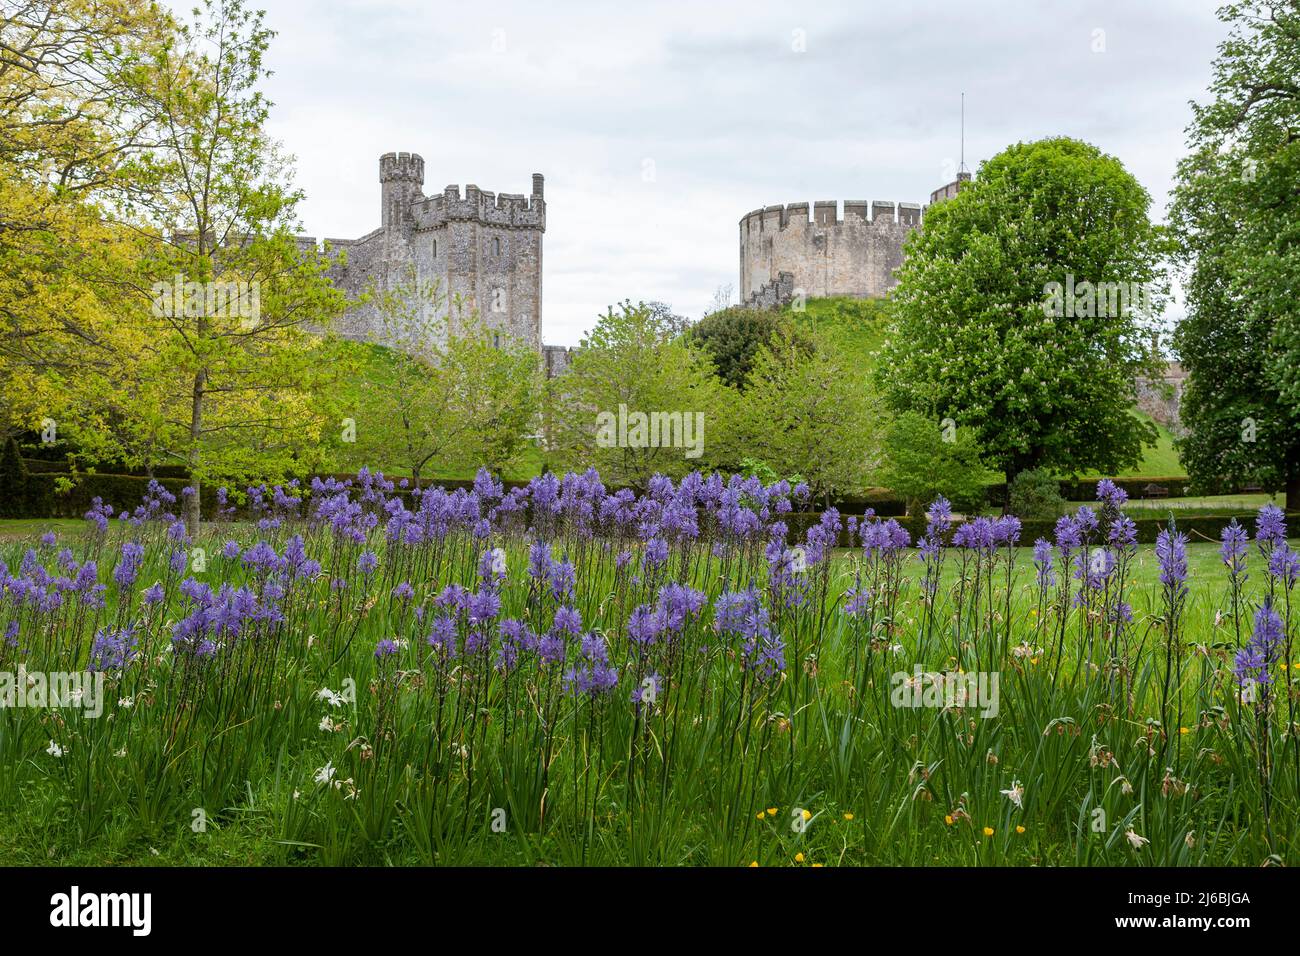 The 13th century Bevis Tower and the Norman motte, surmounted by the 12th century keep, Arundel Castle, West Sussex, England: camassia in foreground Stock Photo